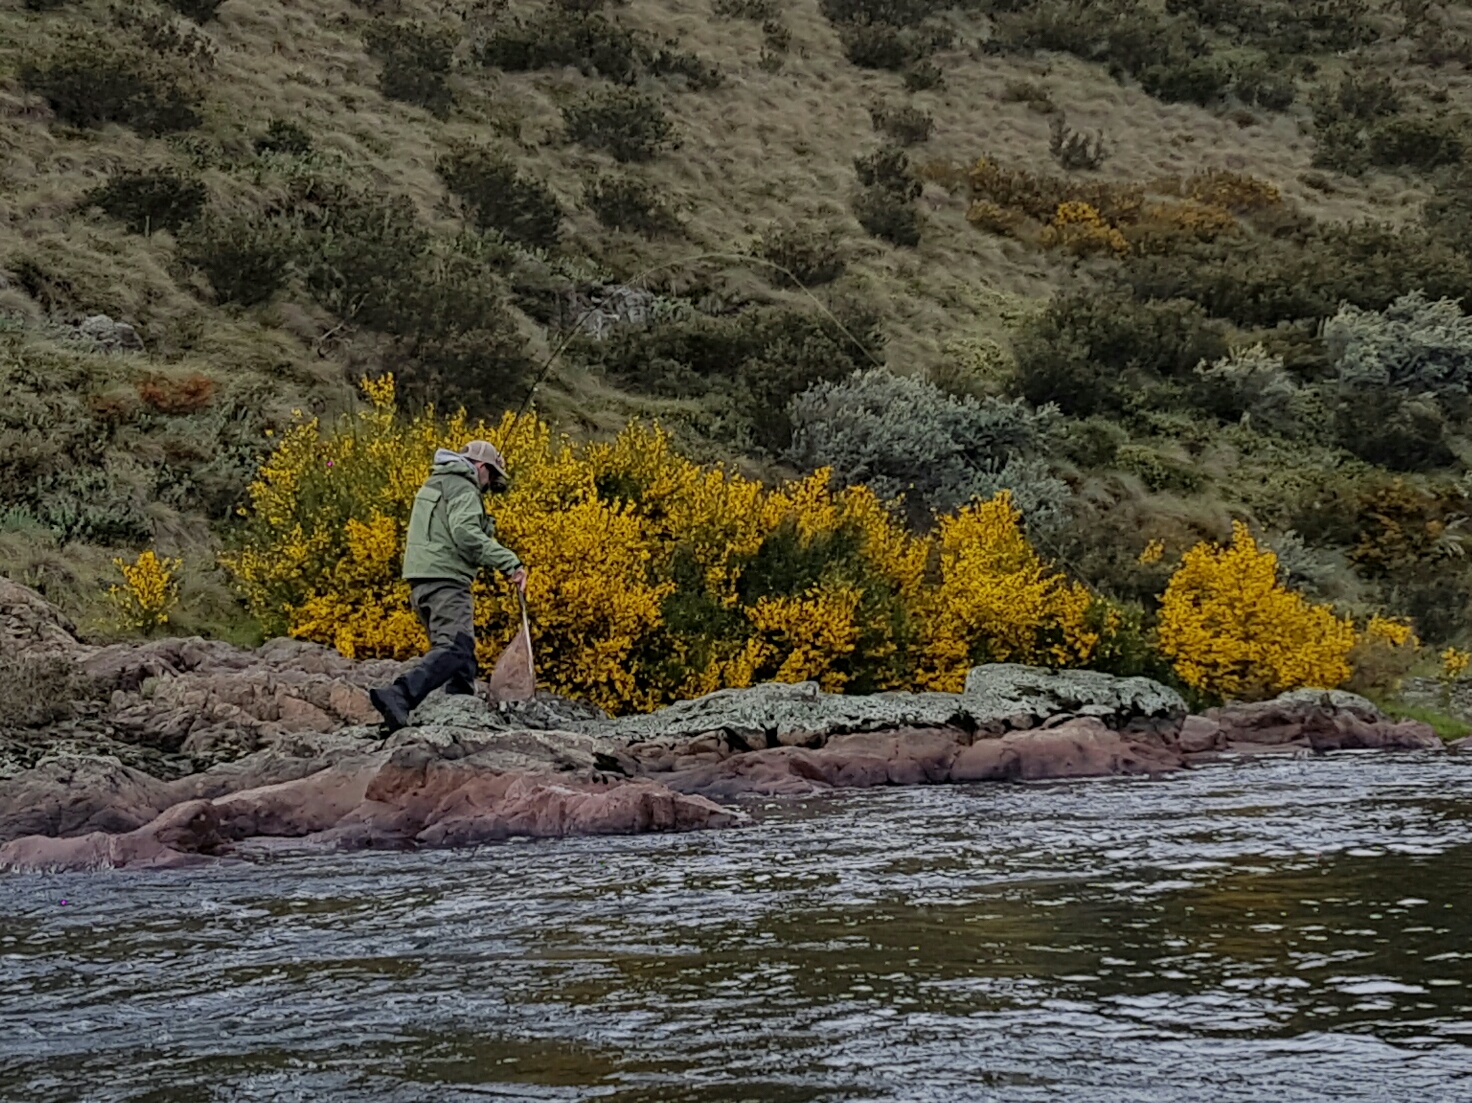 Chasing a decent hook up on the Eucumbene - still with high flows